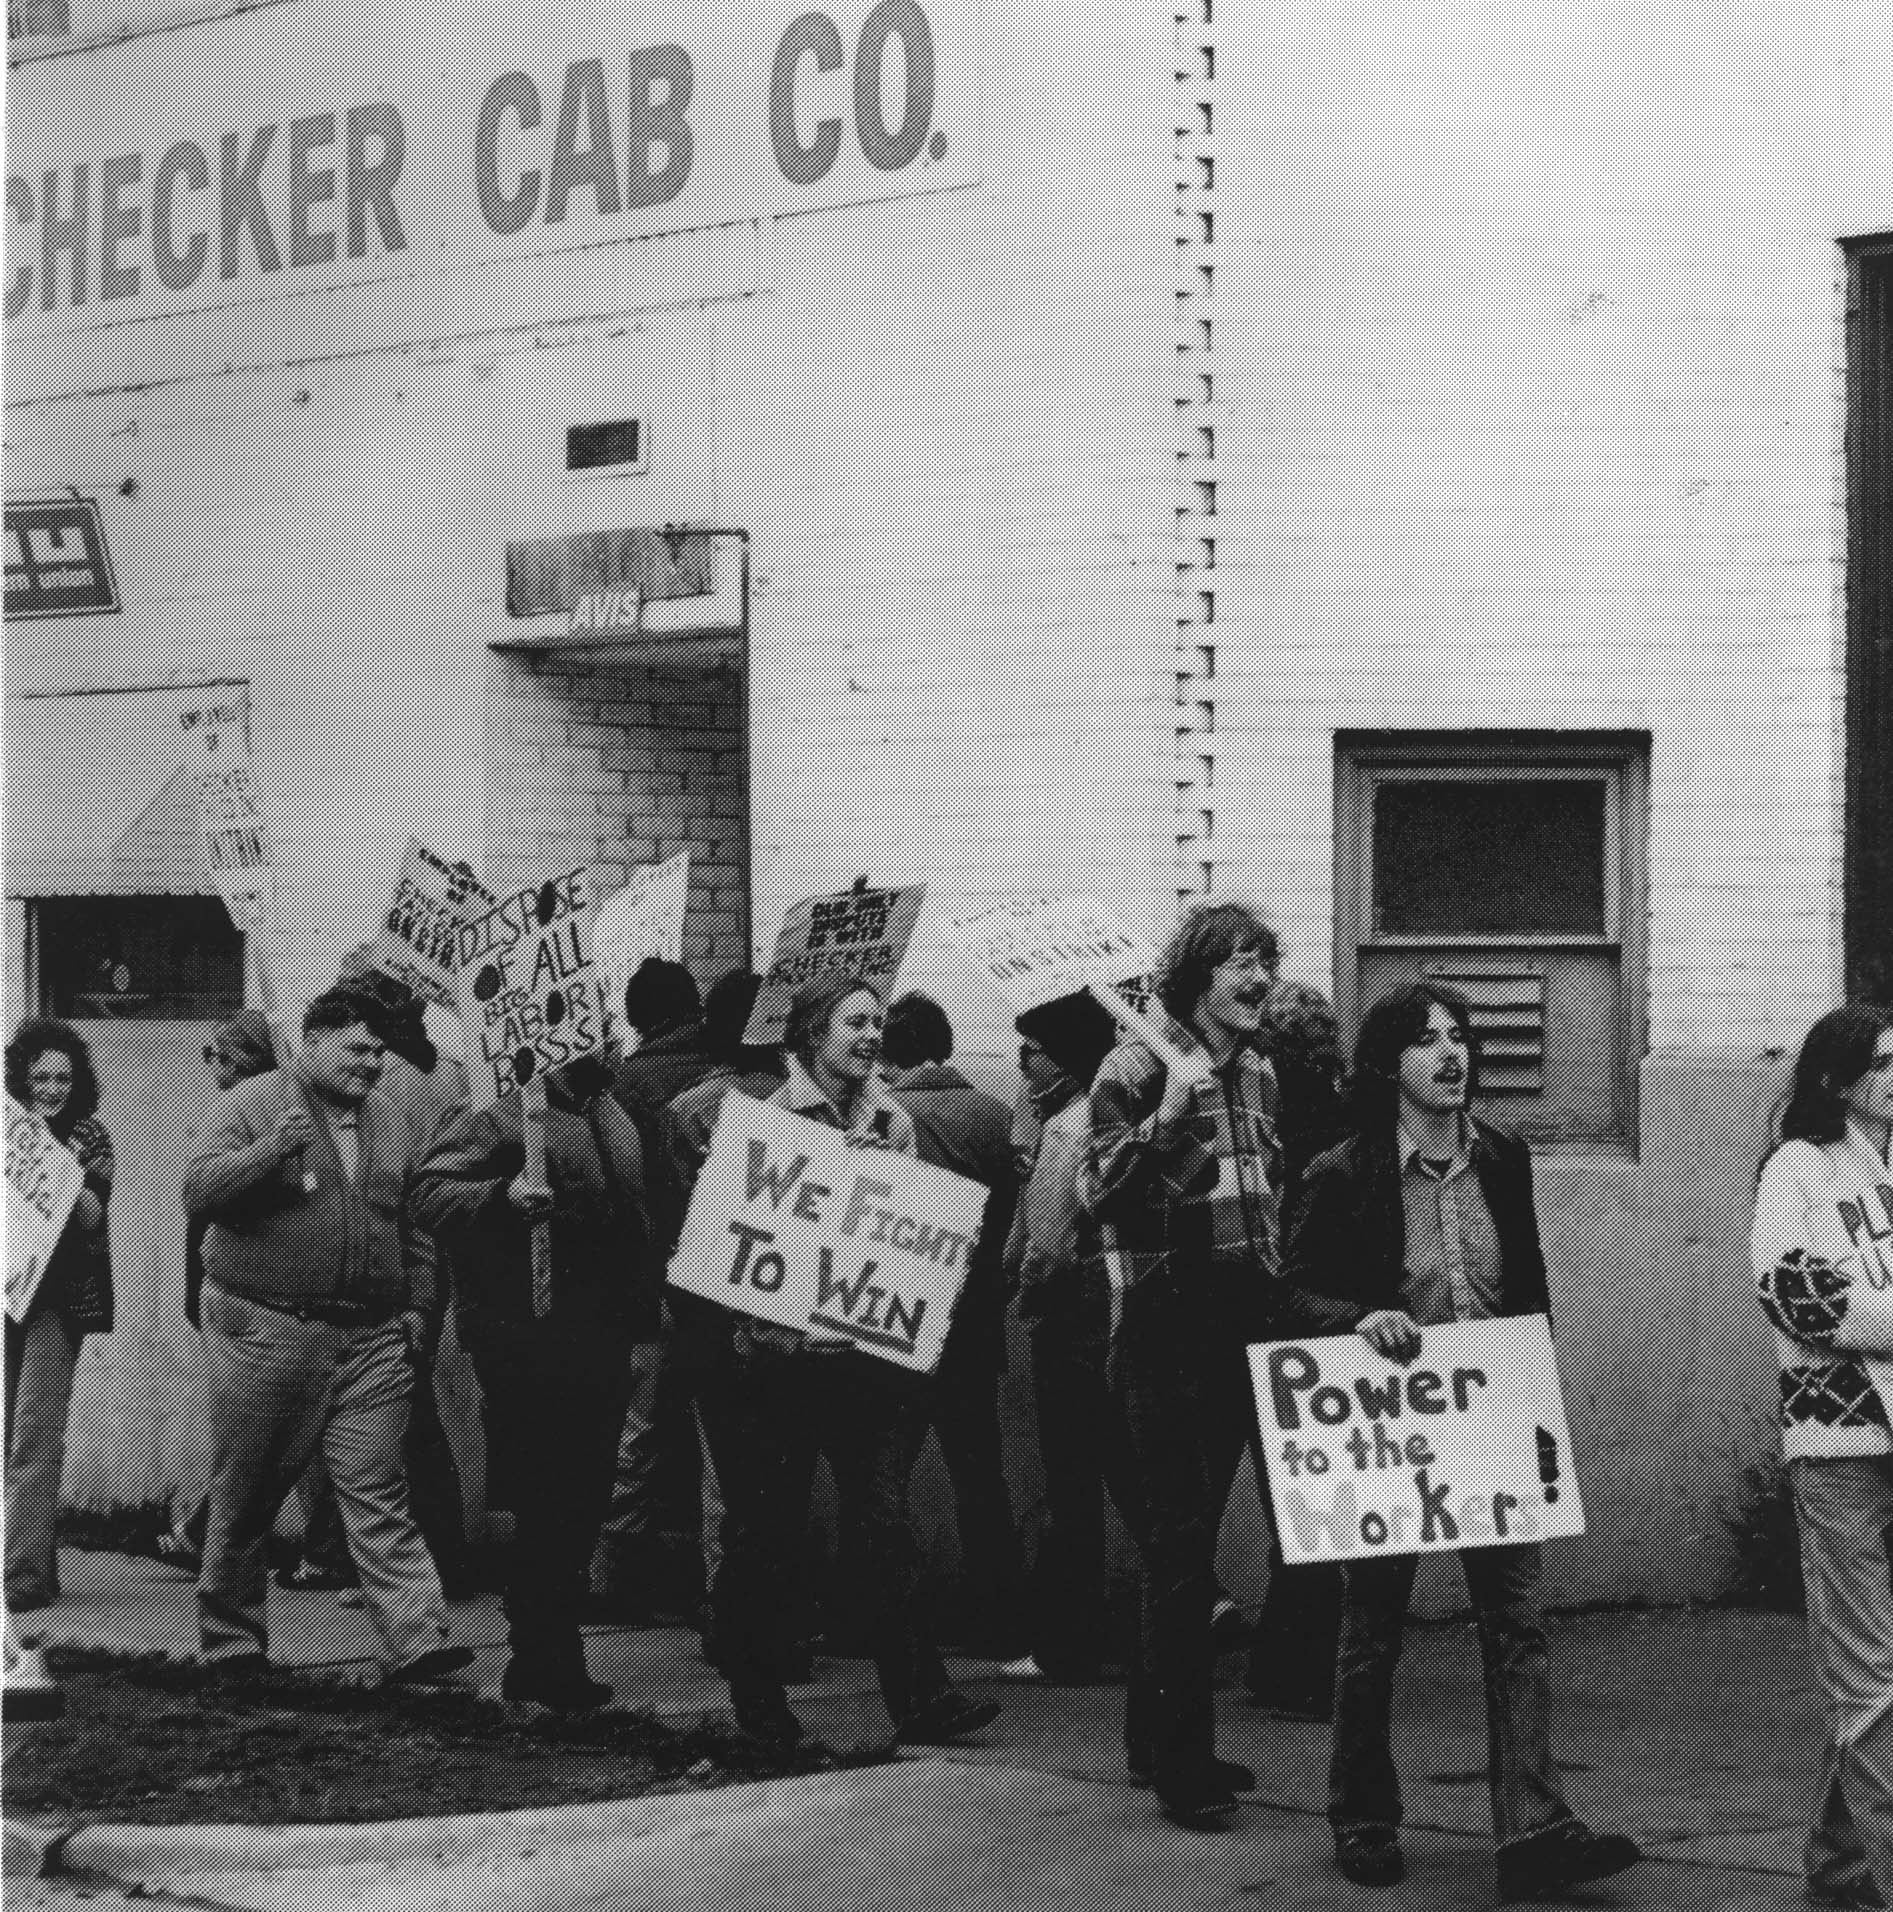 Photo of strikers outside of the Checker Cab Company